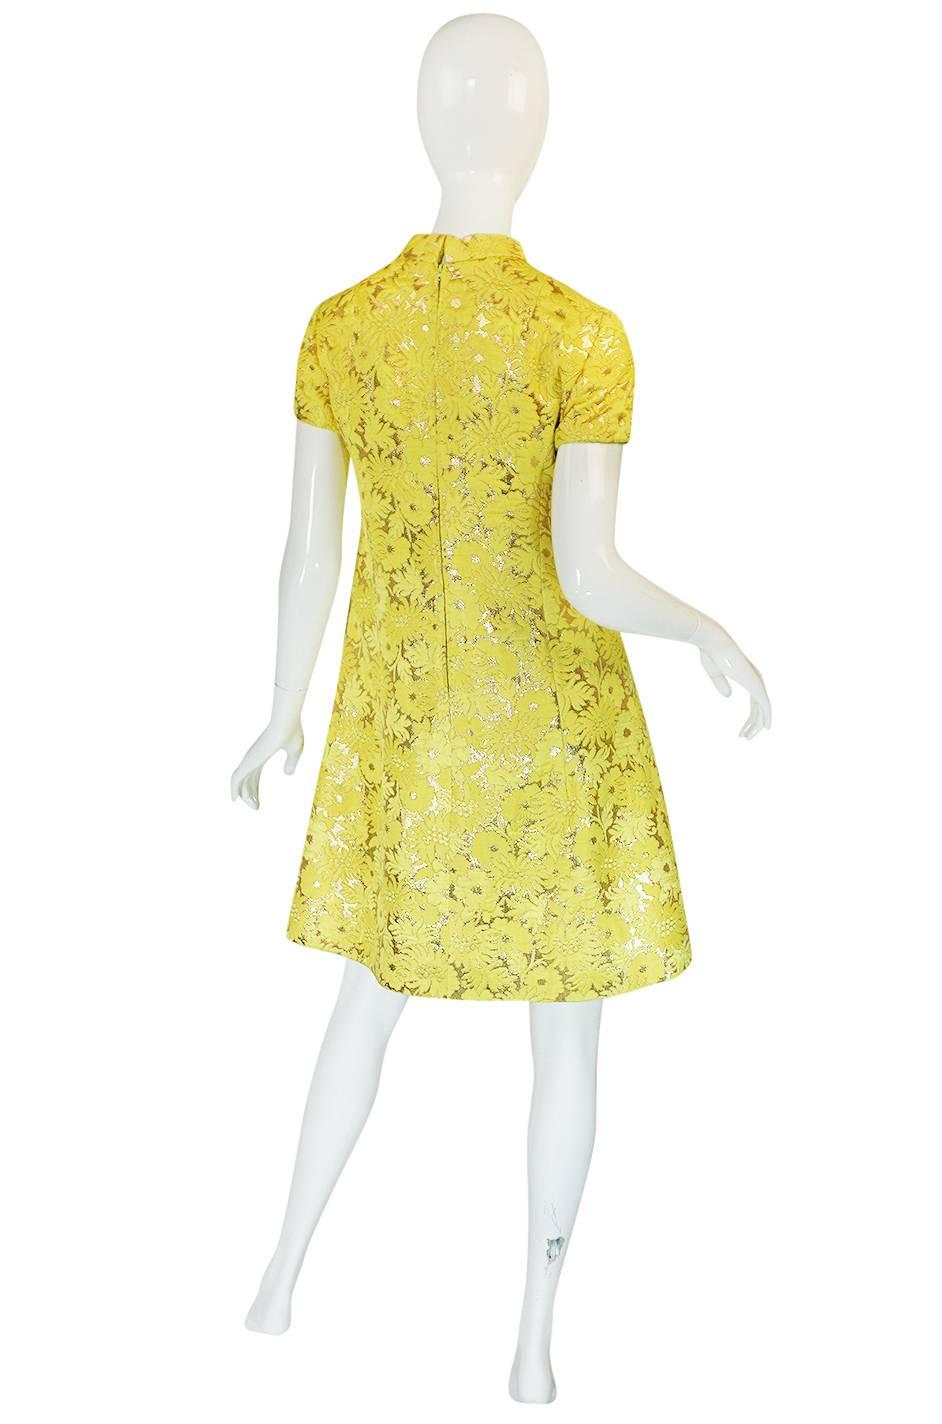 

We had an Oscar dress a couple of years back that we successfully dated based on a piece held at The Met and this dress has the same collar detail as that so I am sure it is also from the 1968 time period. That clue along with the early Oscar